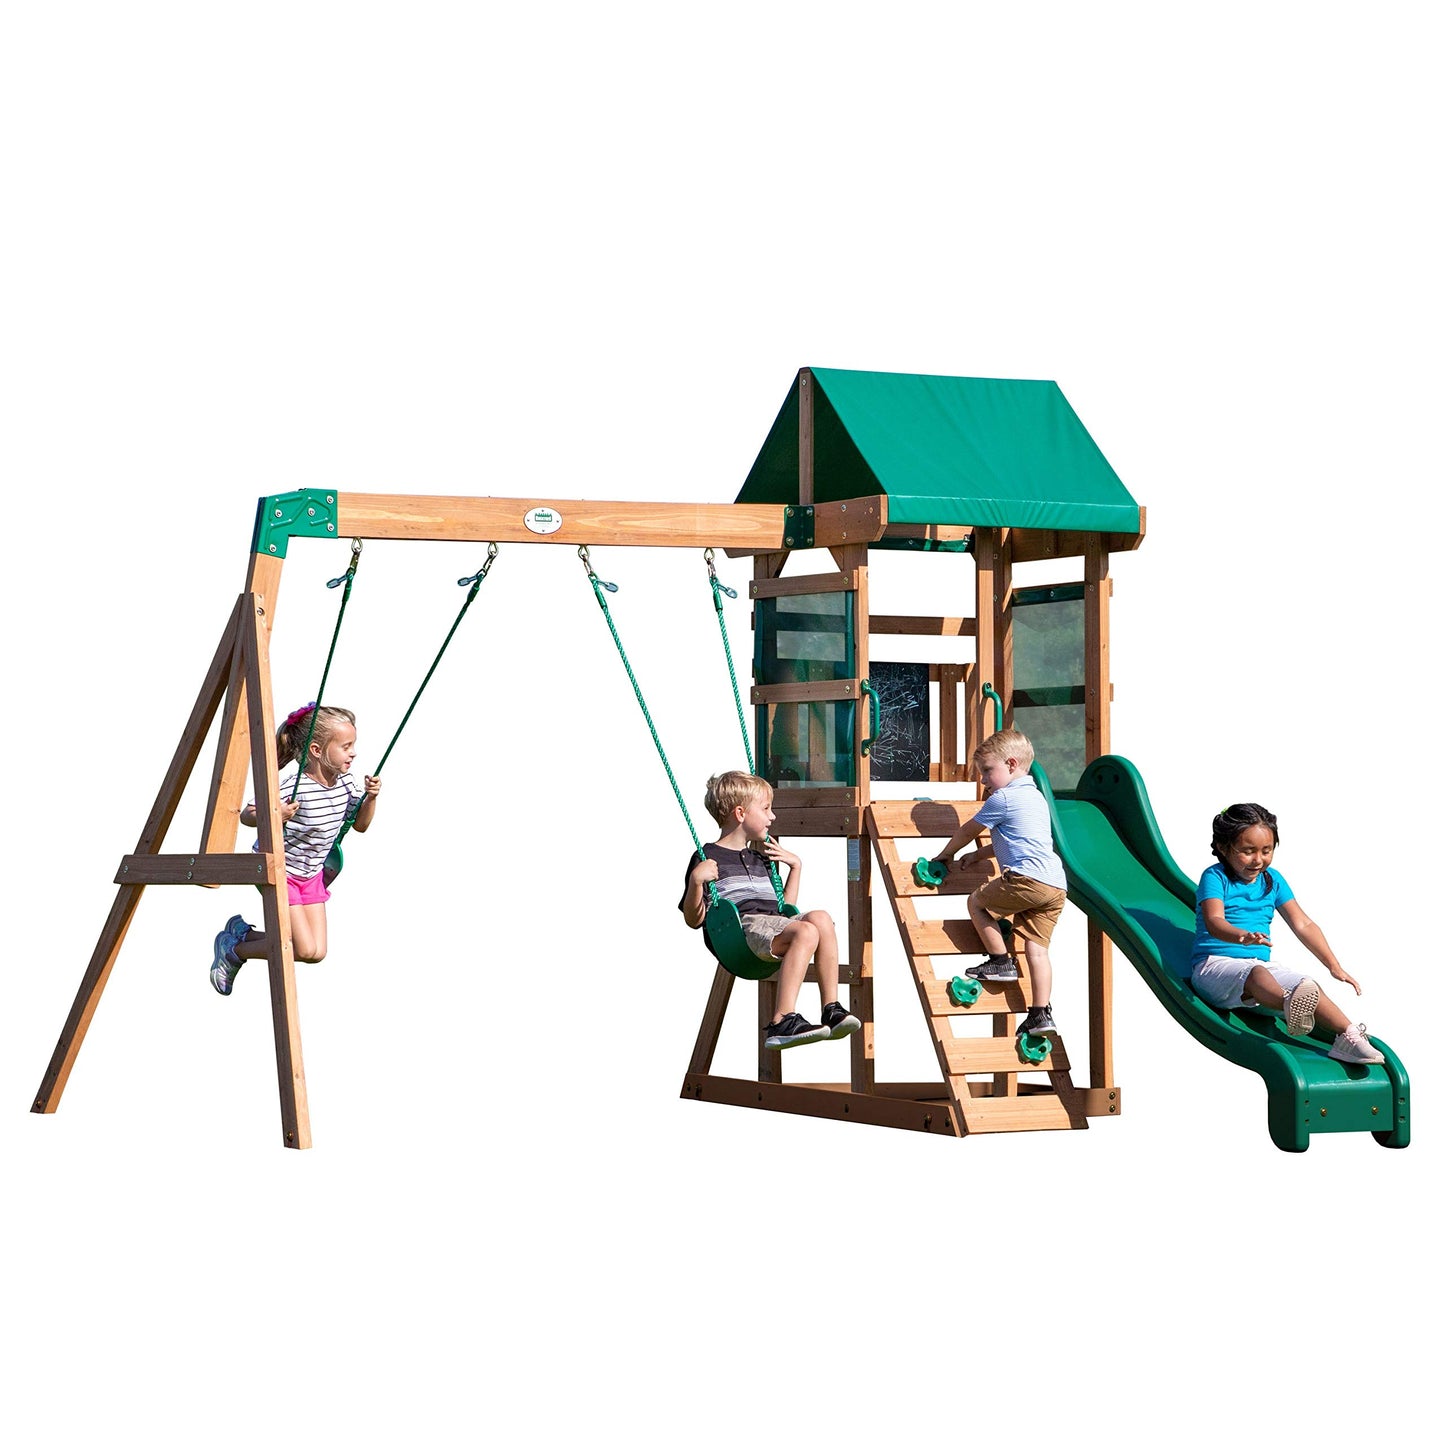 Backyard Discovery Buckley Hill Wooden Swing Set, Made for Small Yards and Younger Children, Two Belt Swings, Covered Mesh Fort with Canopy, Rock Climber Wall, 6 ft Slide Green - Like New